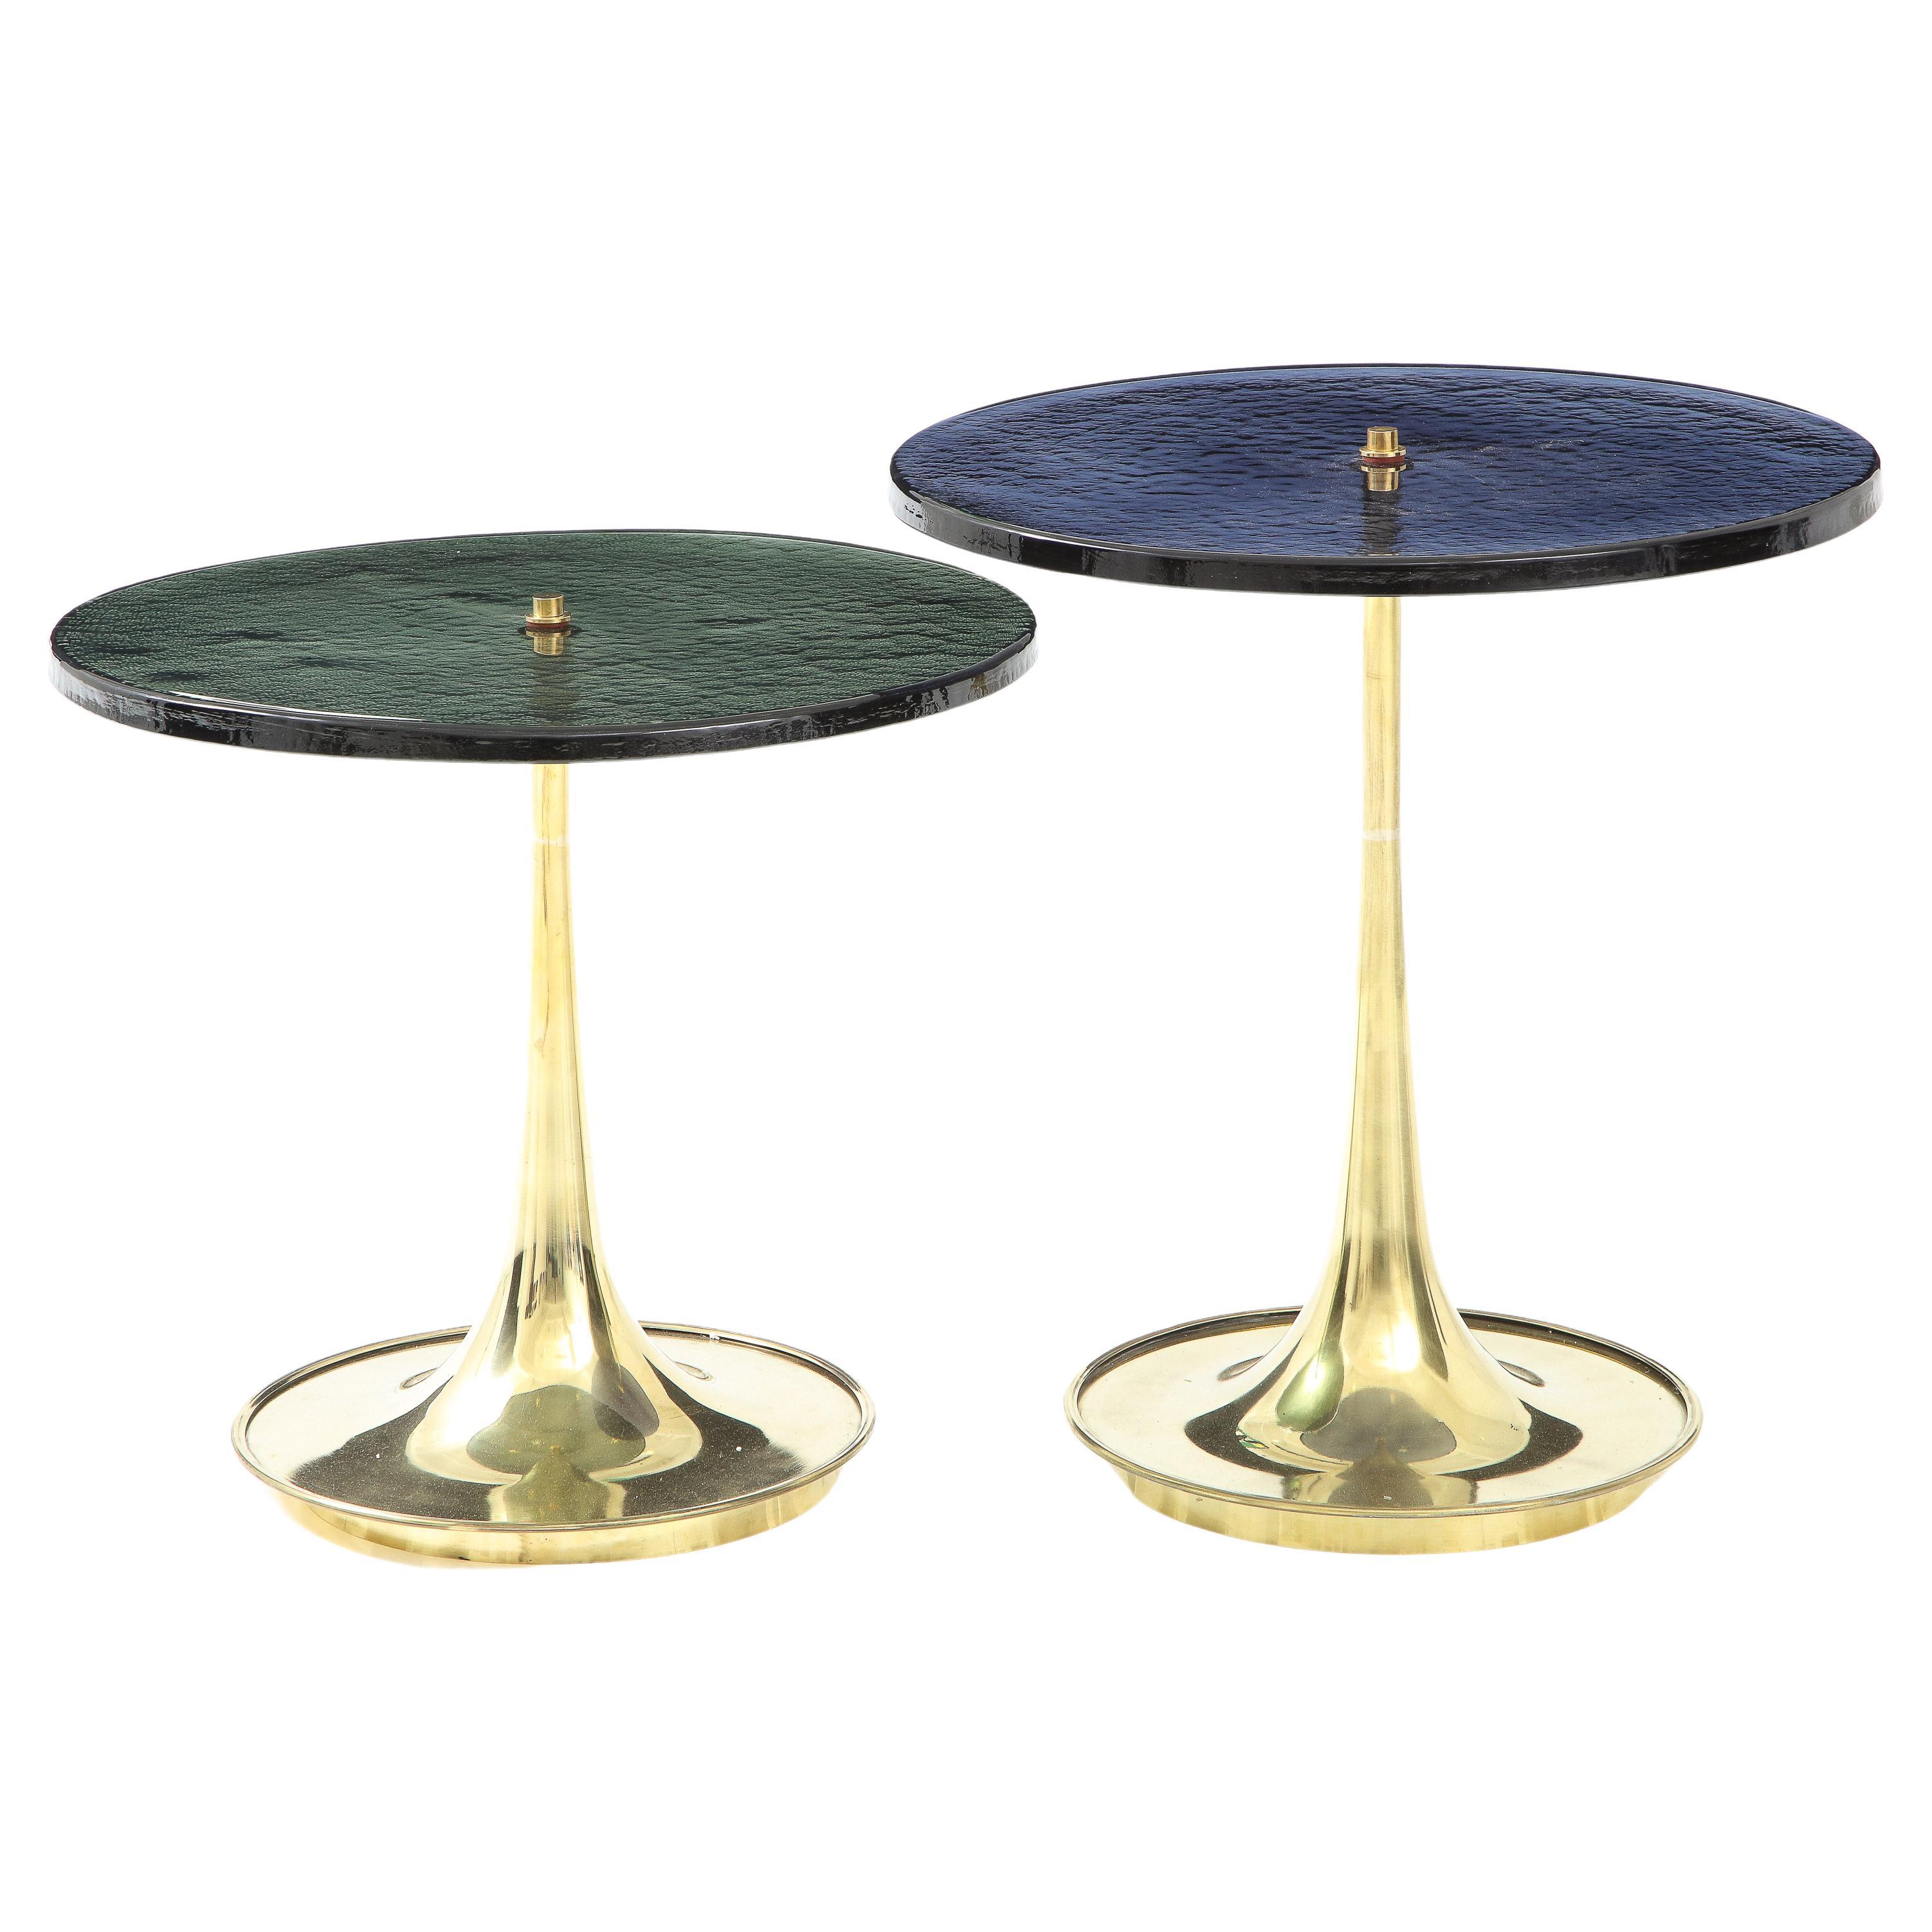 Pair of Round Blue and Grey Murano Glass and Brass Martini or Side Tables, Italy